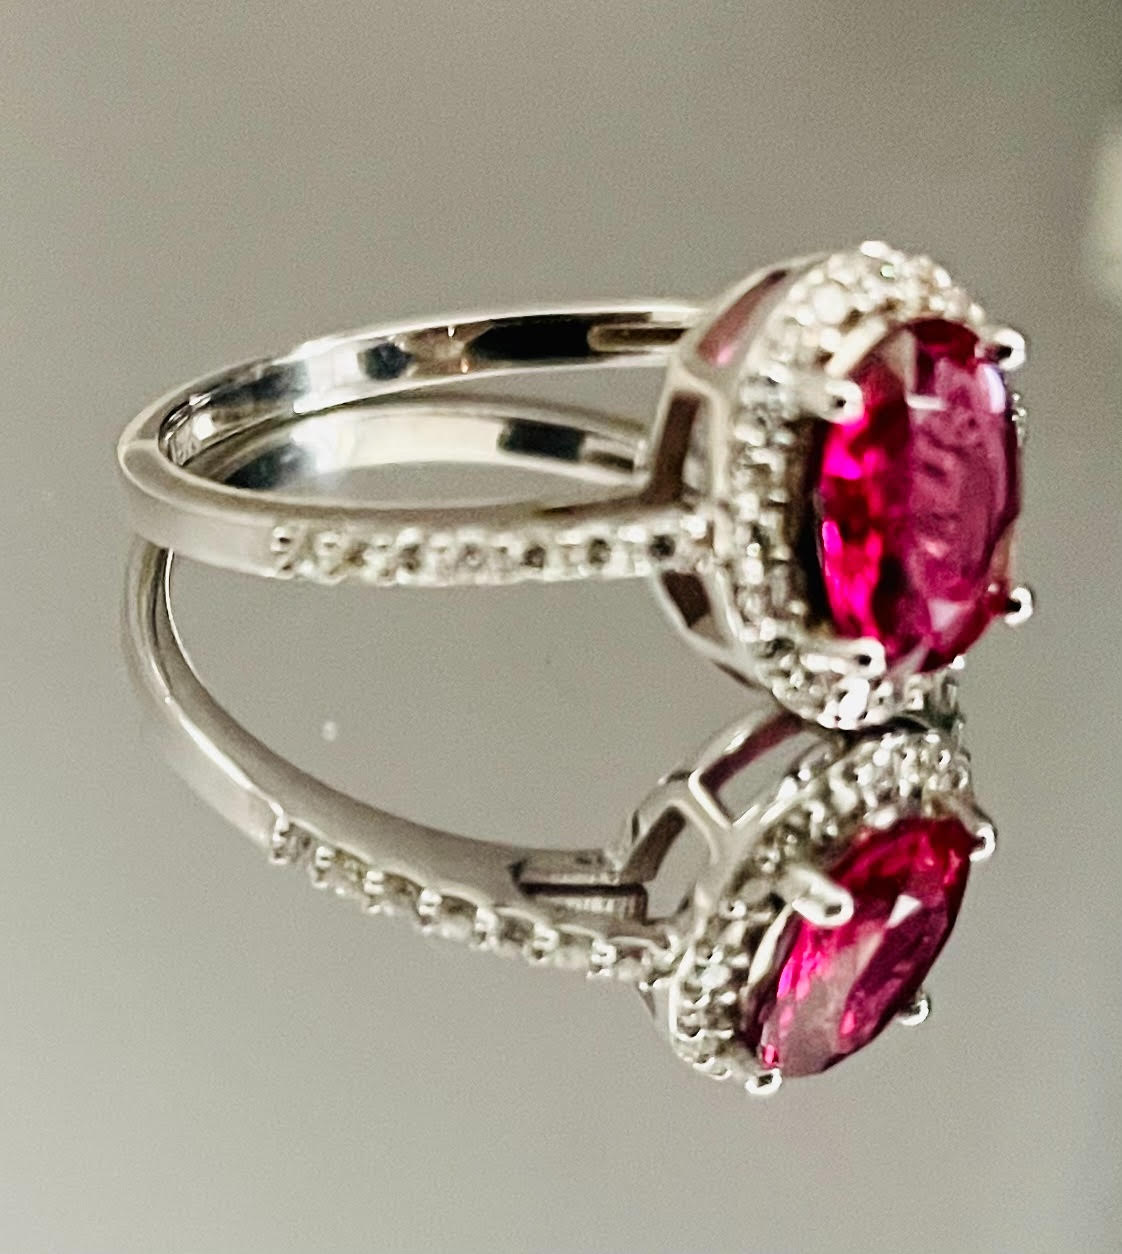 Beautiful Natural Tourmaline Ring With Diamonds and 18k Gold - Image 7 of 7